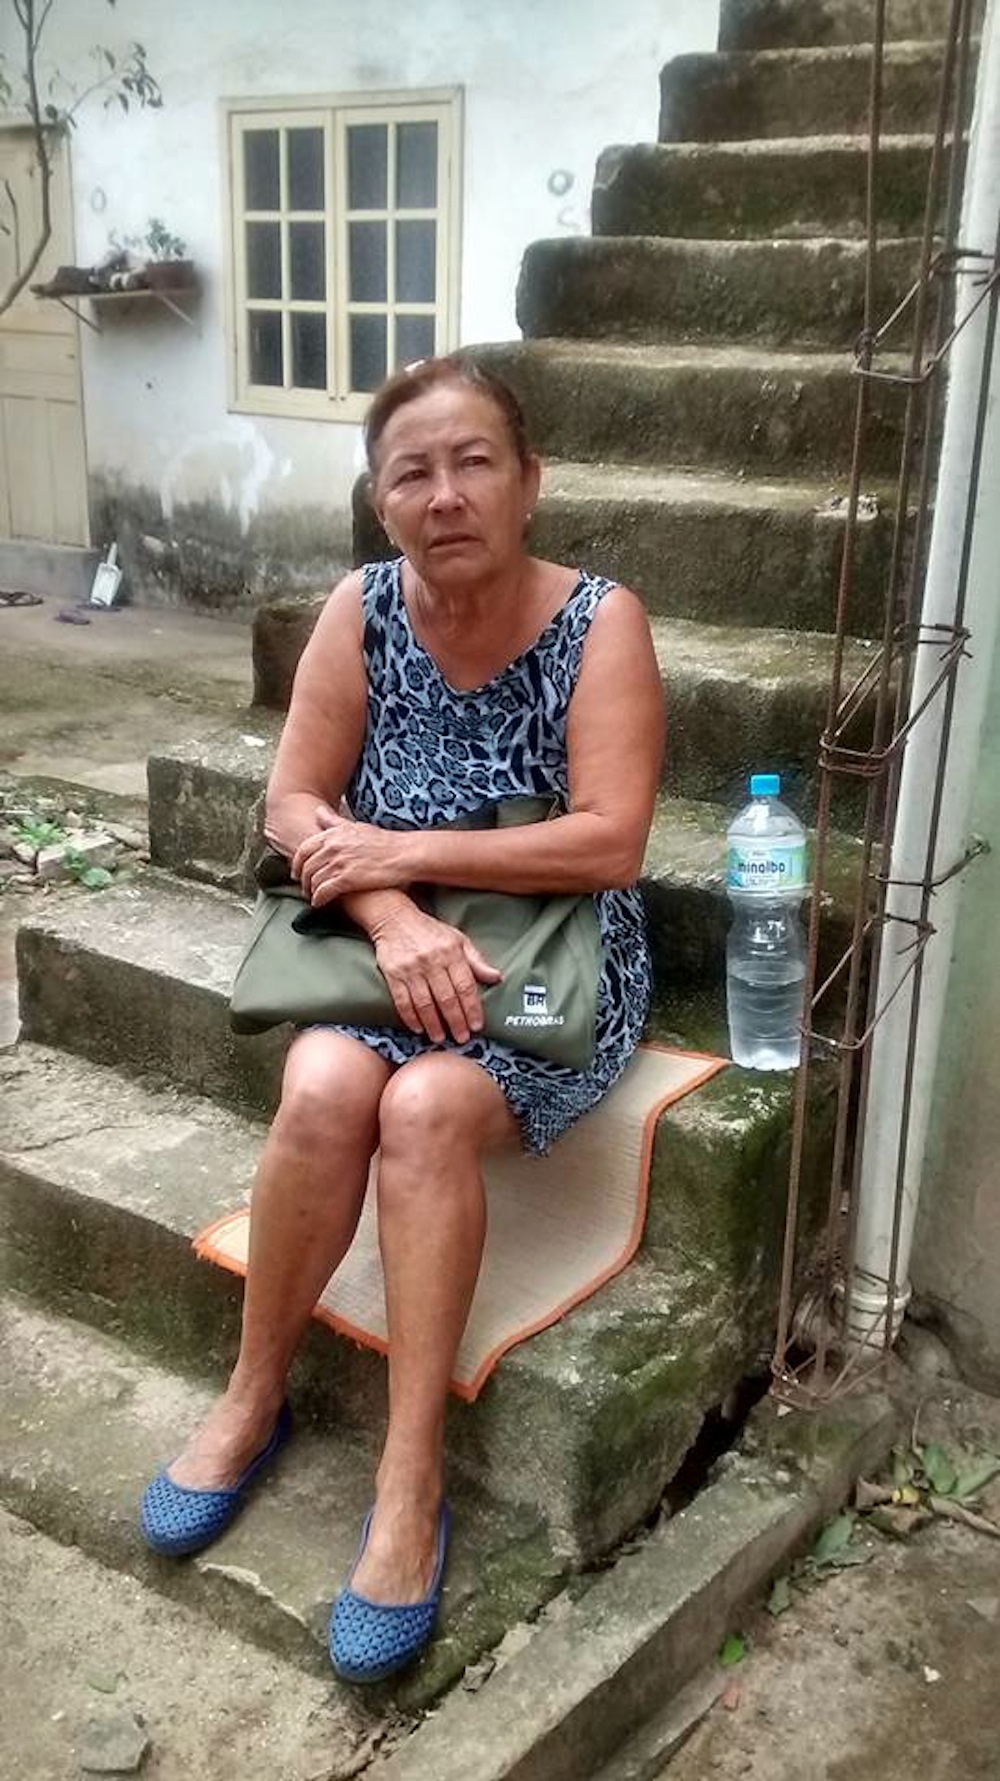 Mariza do Amor Divino photo posted on the community Facebook page after the demolition of her home